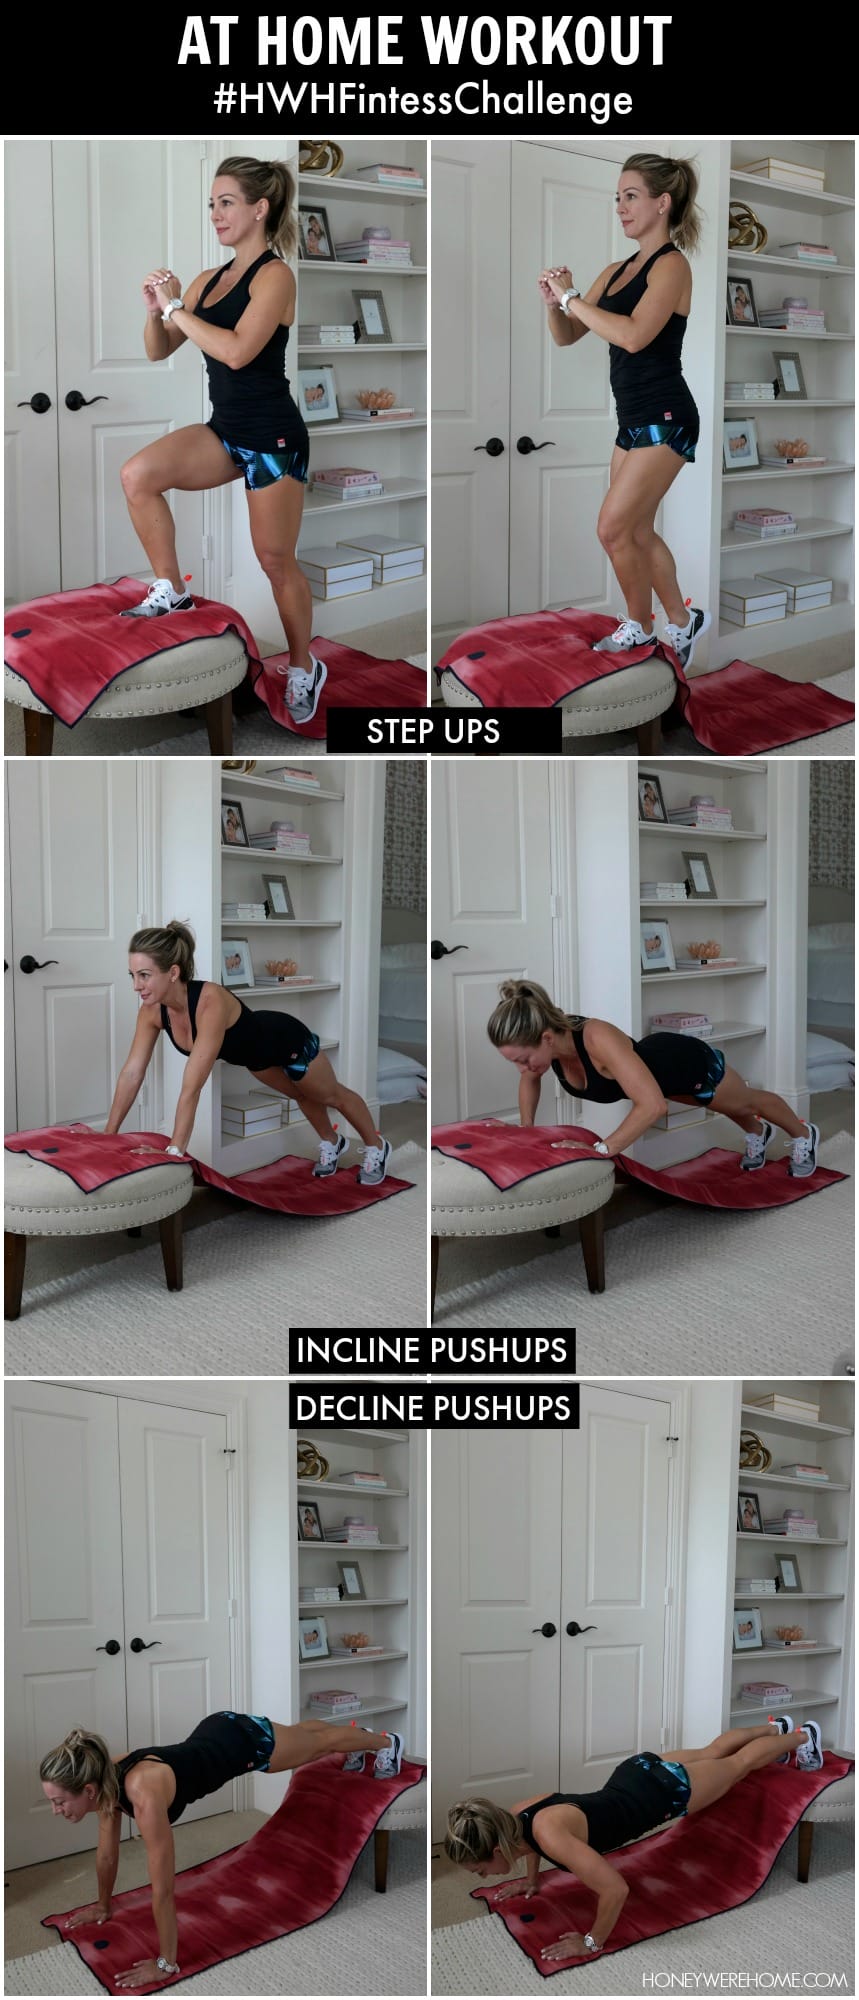 bench or step workout at home